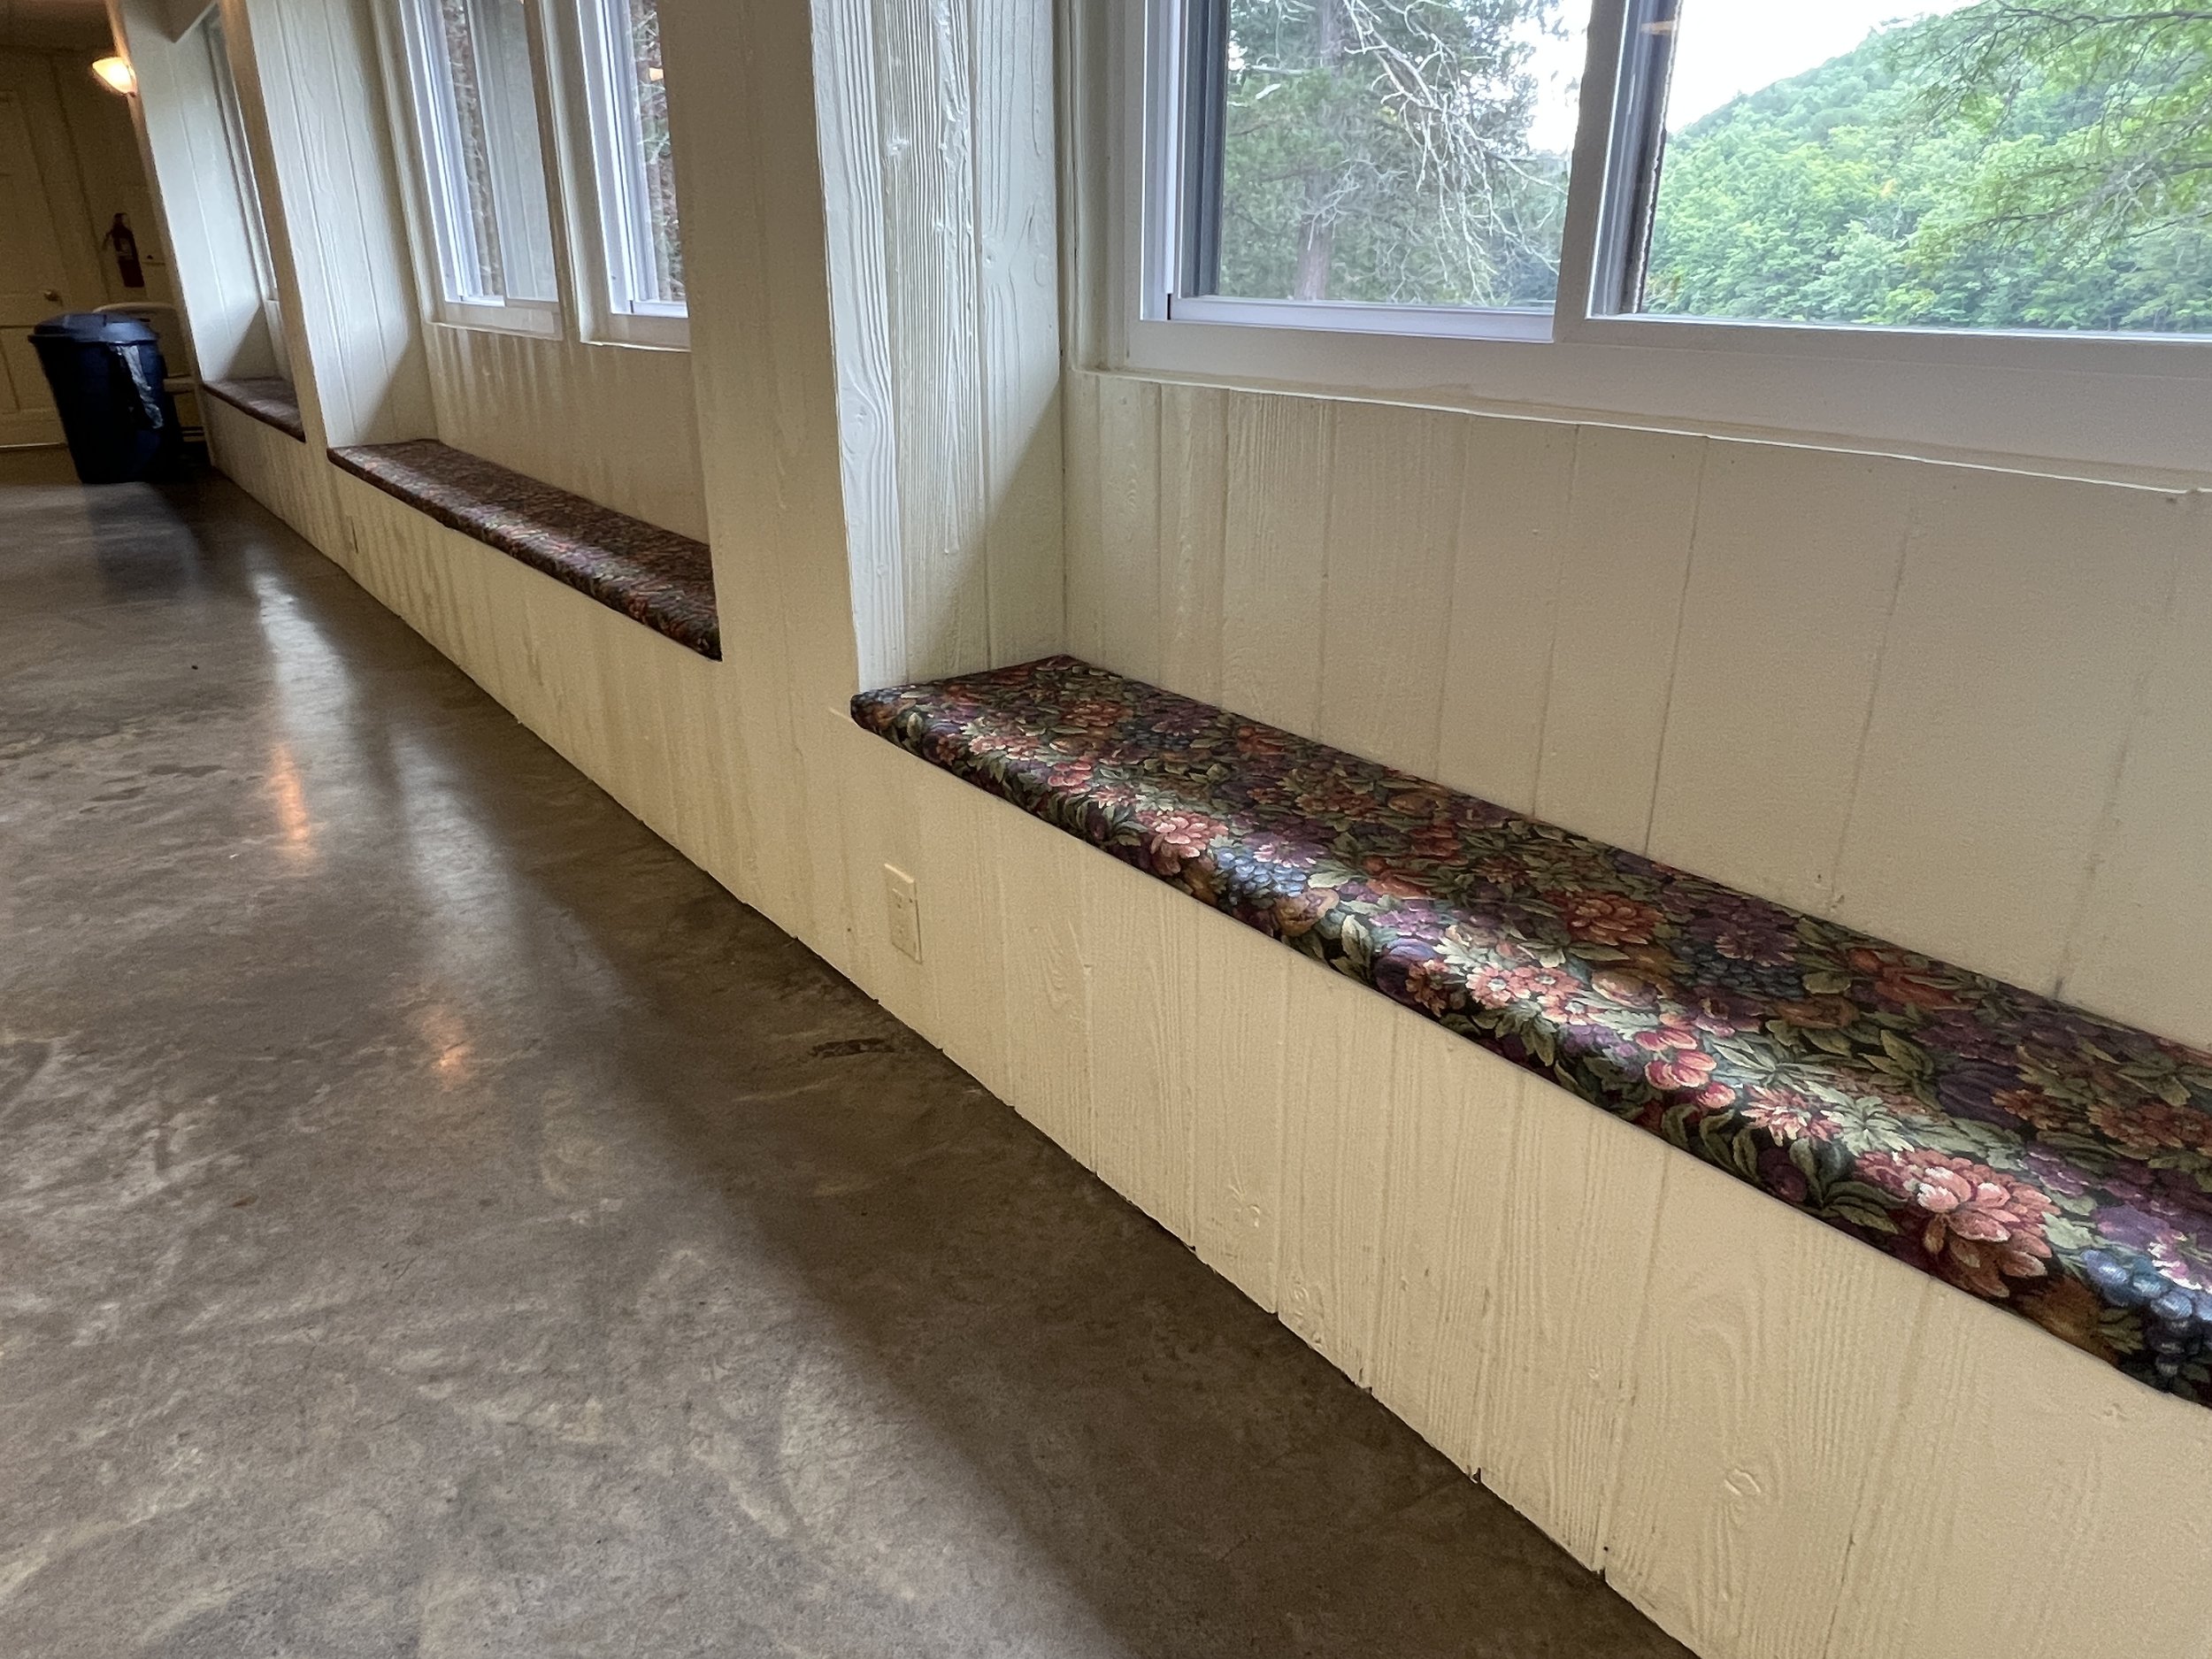 Bench seating along two walls